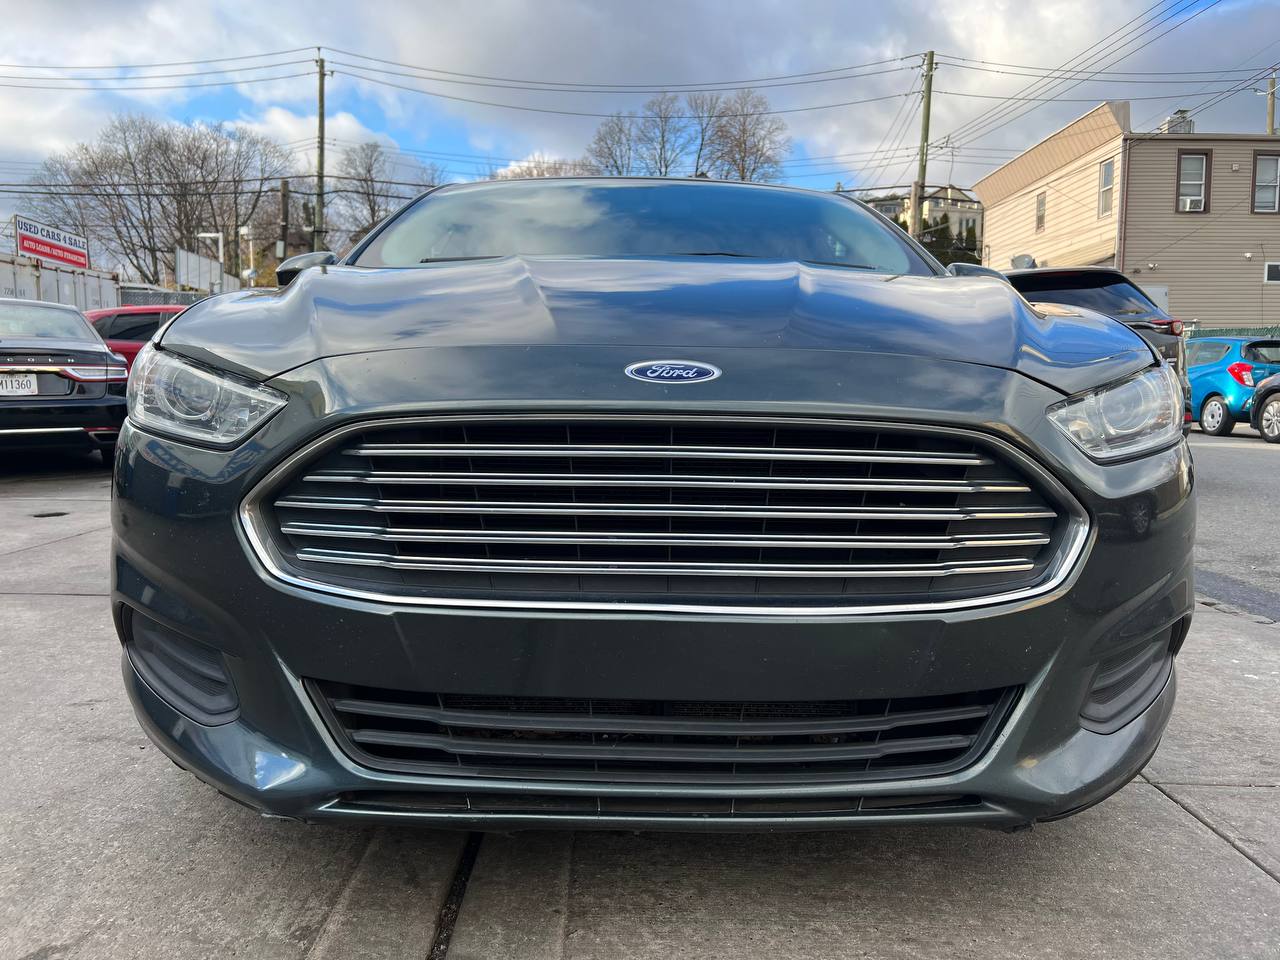 Used - Ford Fusion Sedan for sale in Staten Island NY